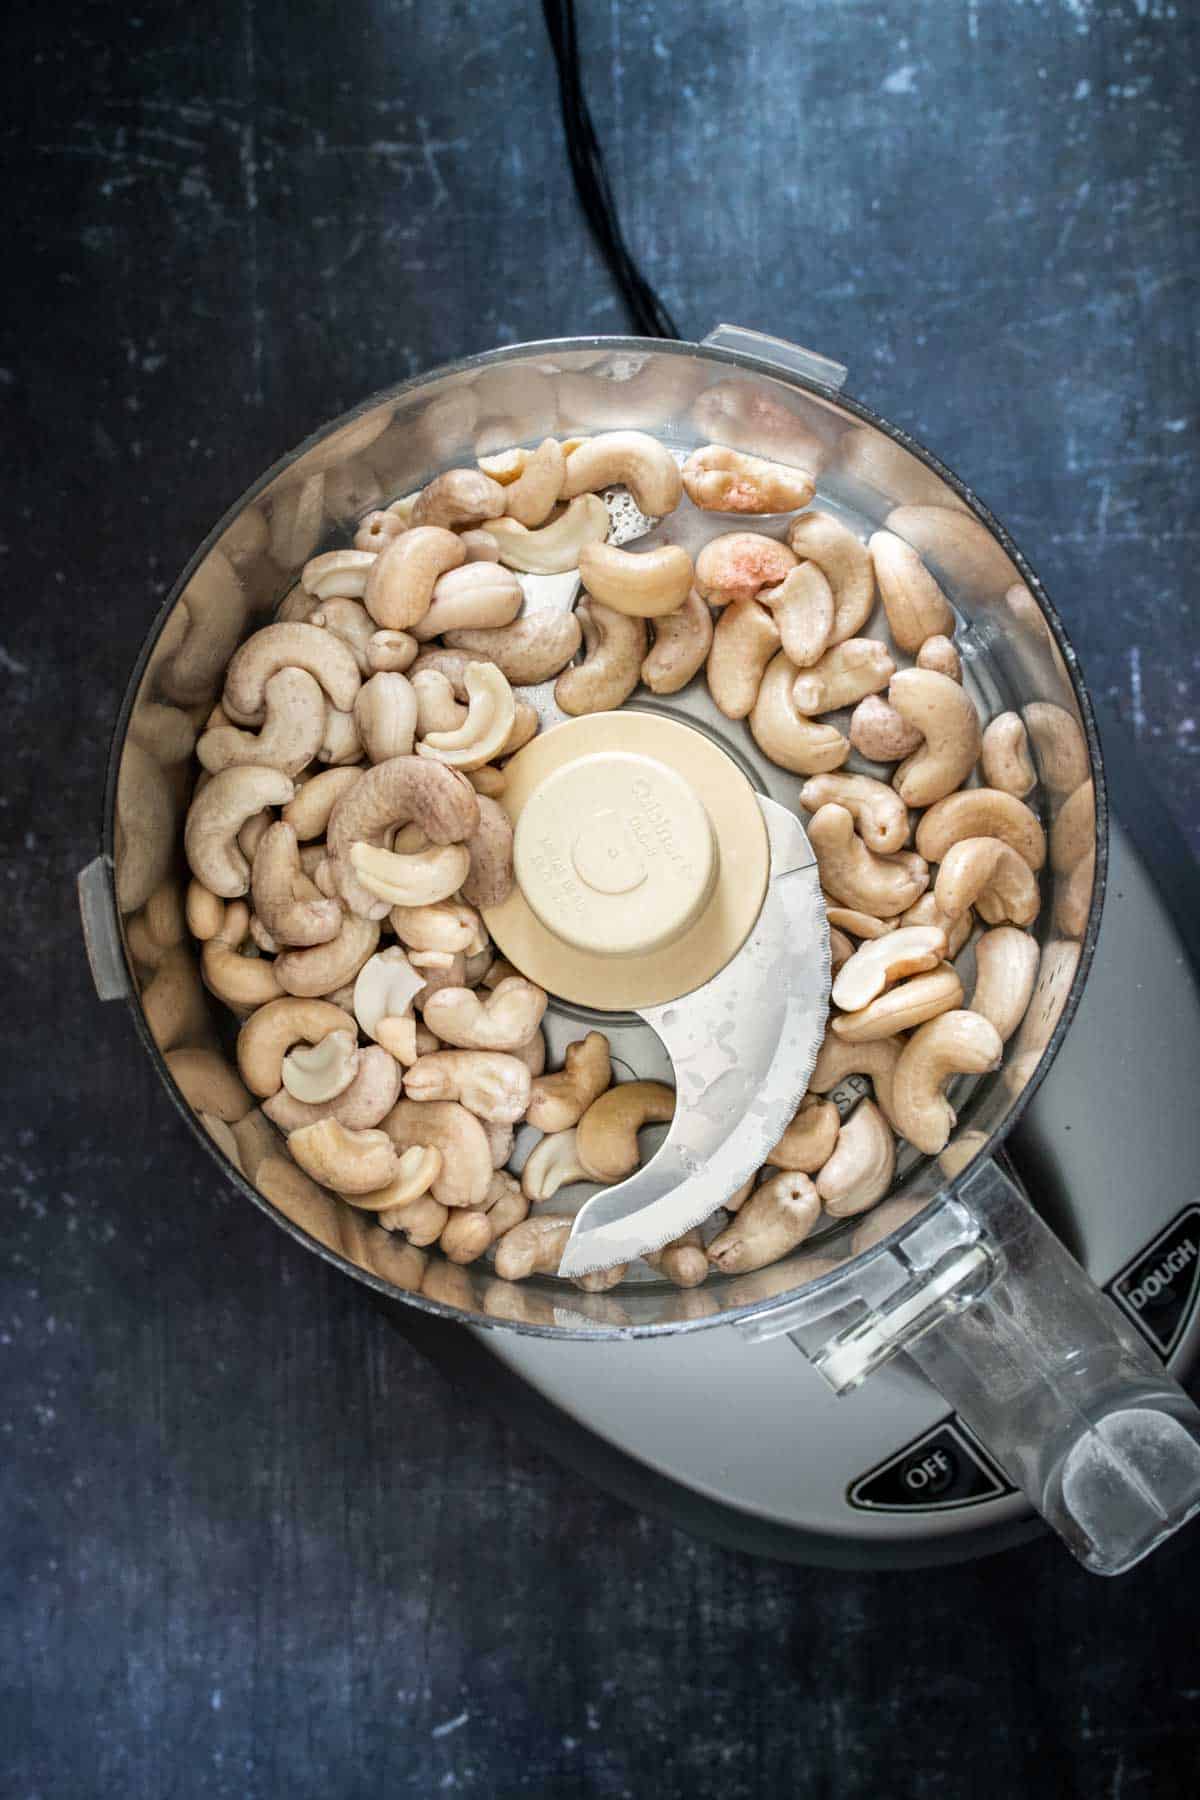 Top view of a food processor with cashews inside of it on a dark surface